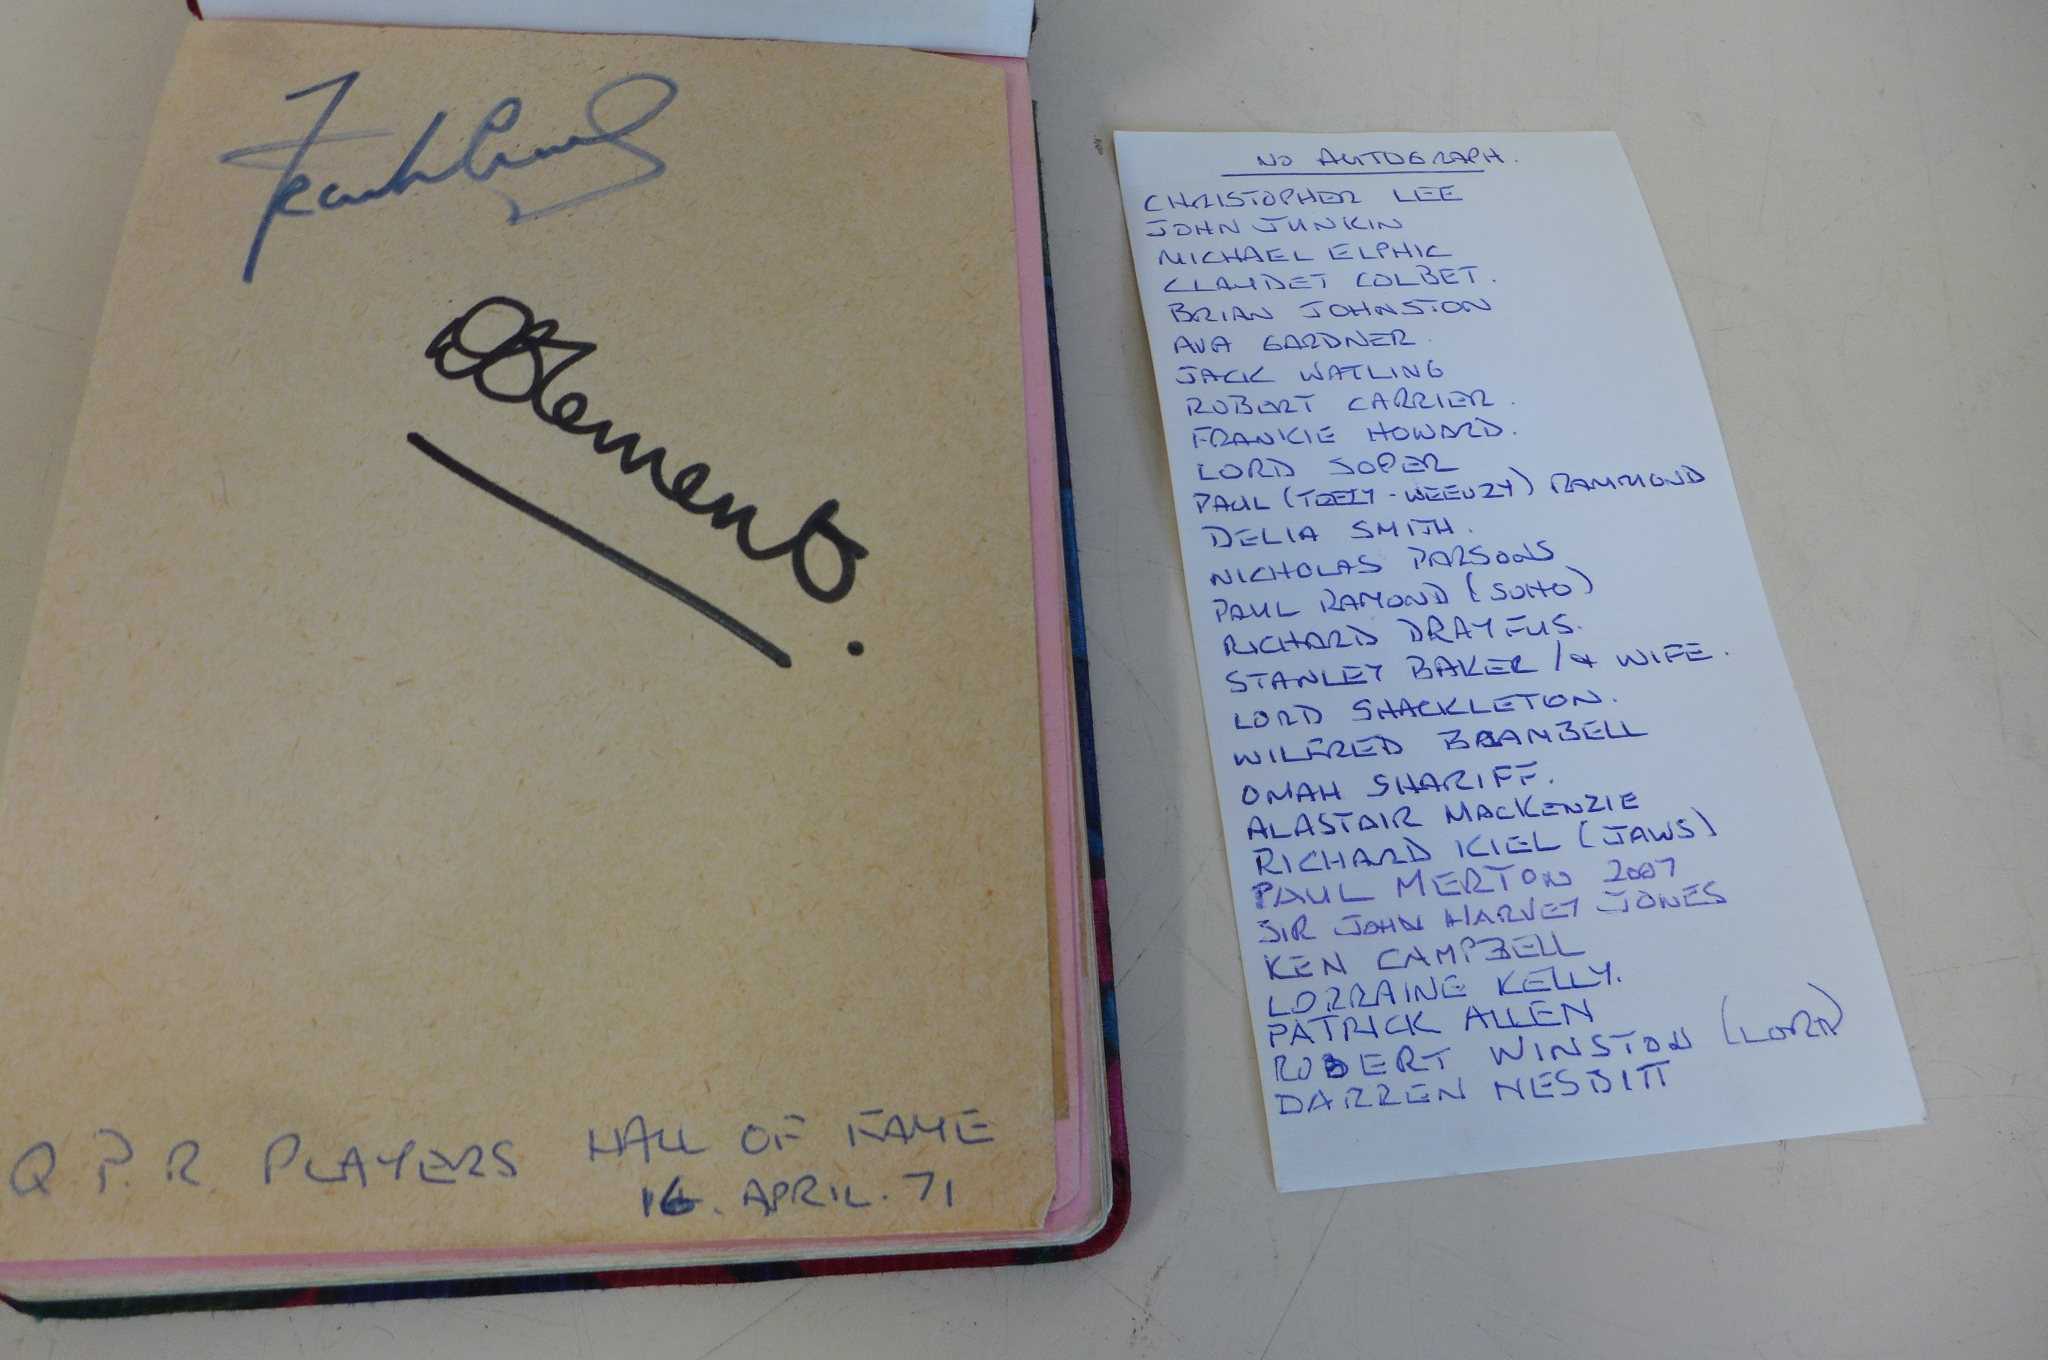 An interesting autograph book with autographs, including Topol, Christopher Lee, Ava Gardner,